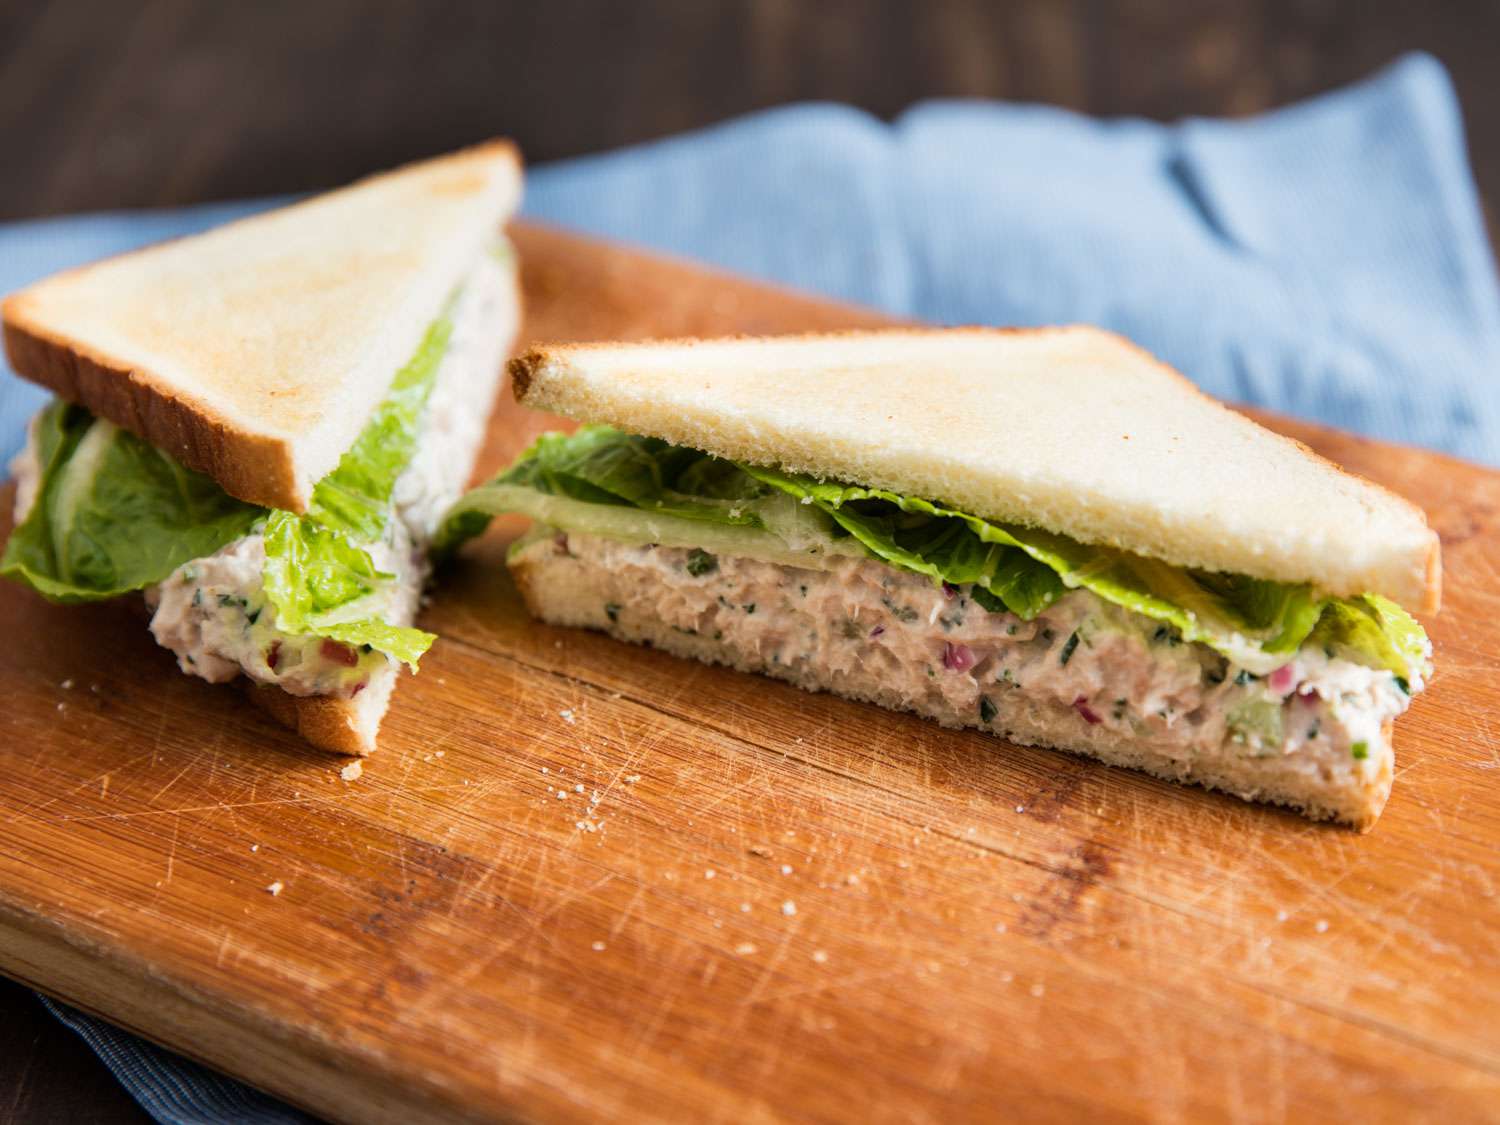 A tuna sandwich on a cutting board. The sandwich is cut in half on the diagonal and the cut side of one half is faced to the camera.